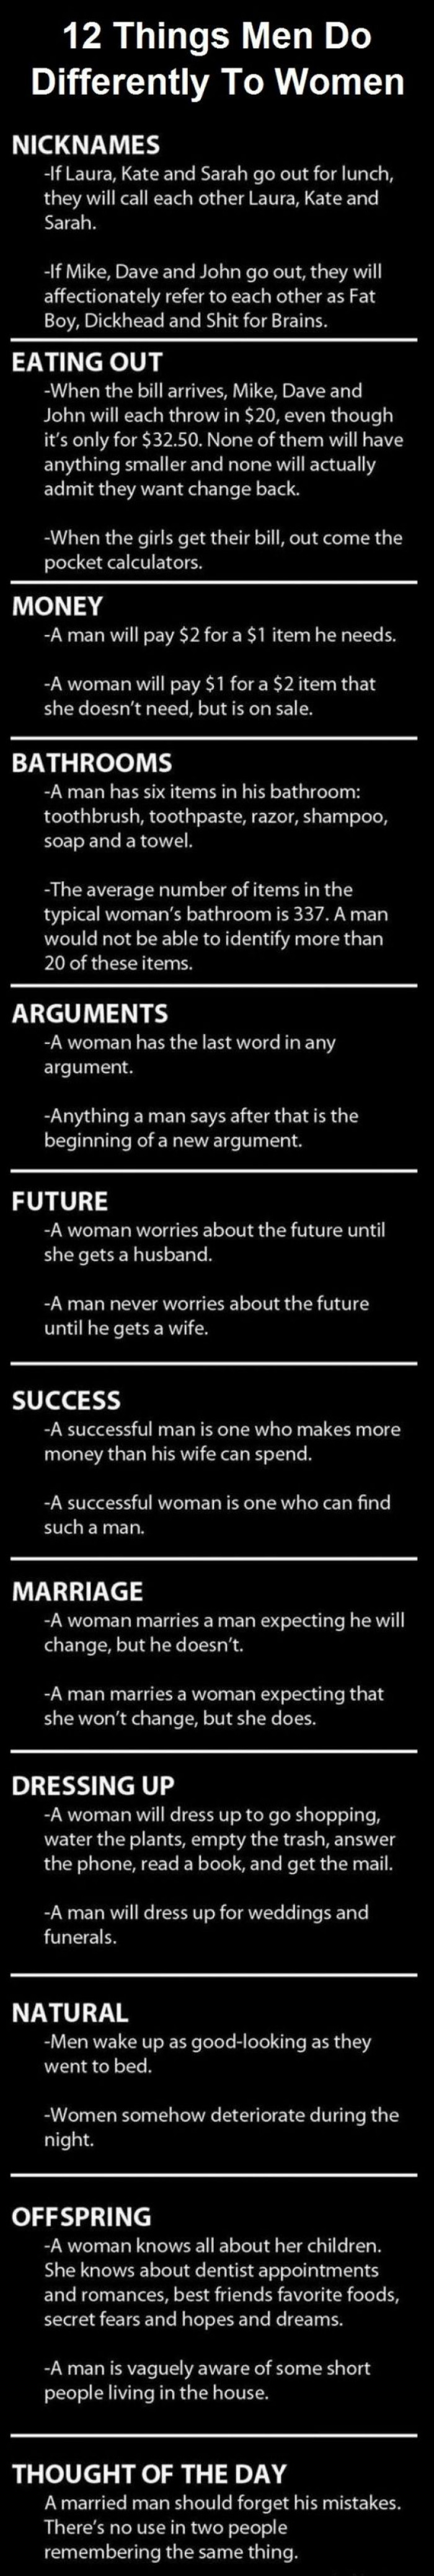 Things Men Do Differently To Women